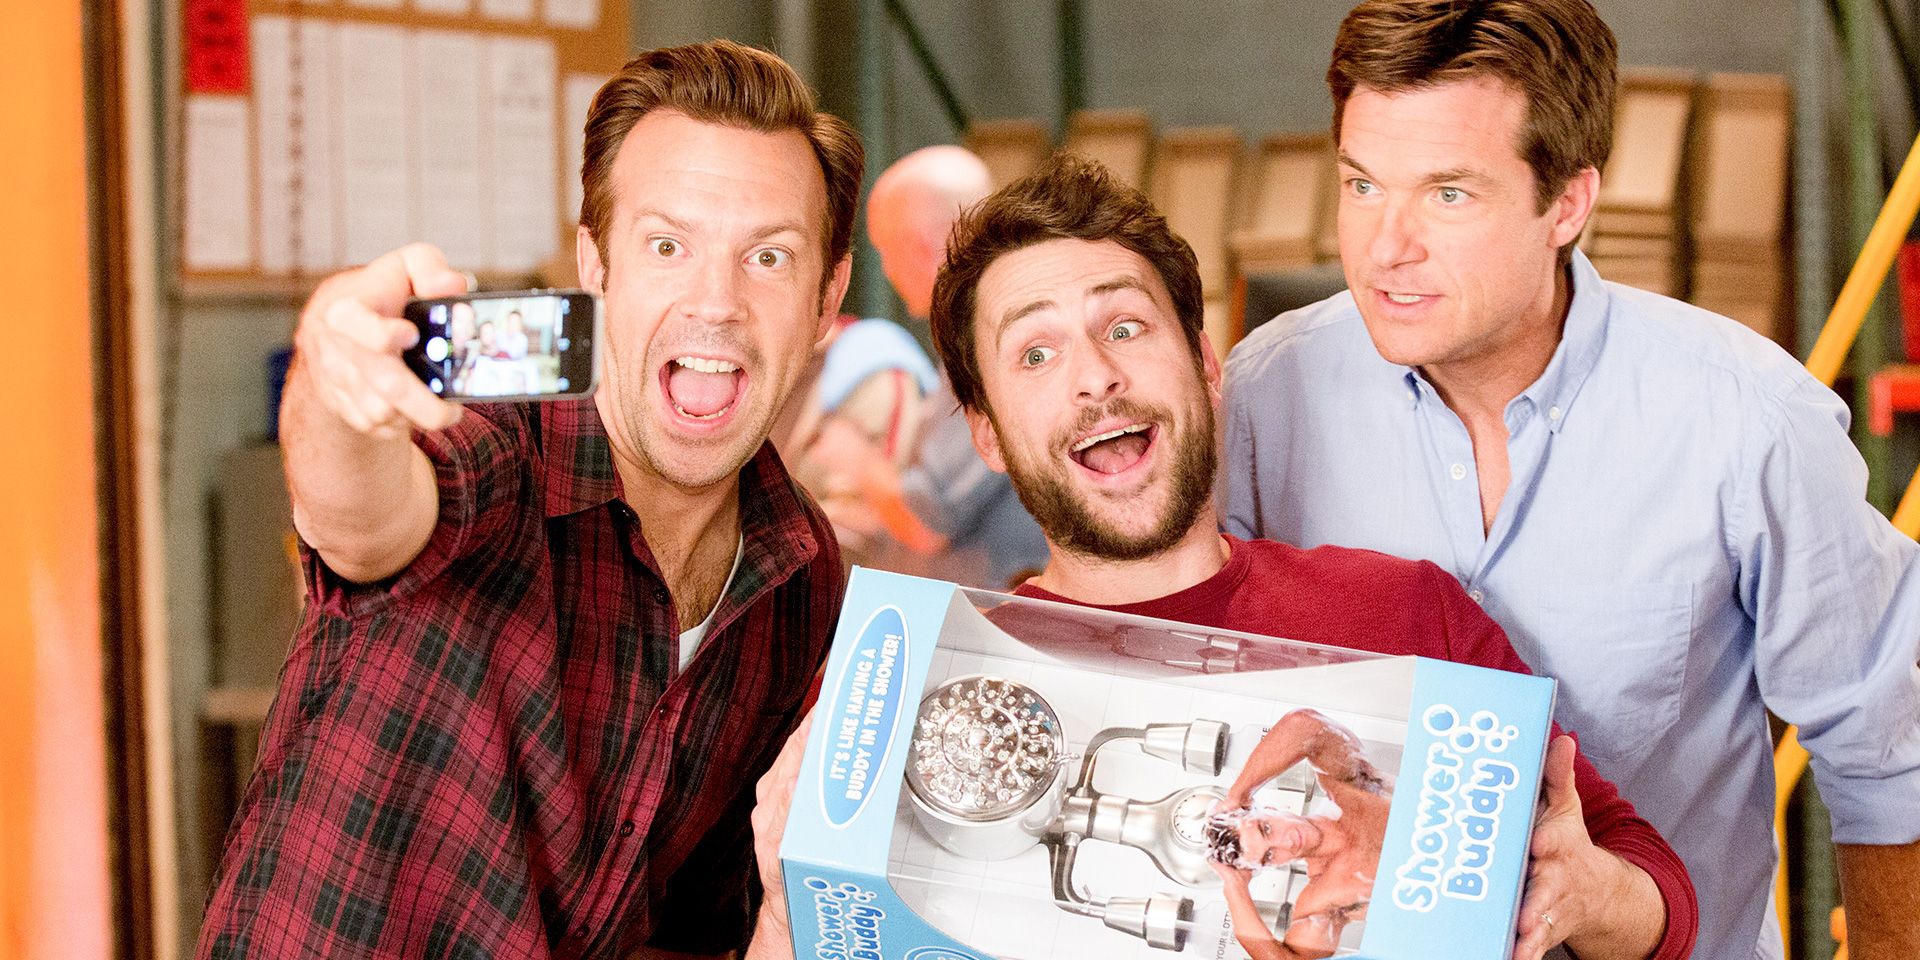 Kurt (Jason Sudeikis), Dale (Charlie Day) and Nick (Jason Bateman) take a selfie posing with the Shower Buddy in Horrible Bosses 2.